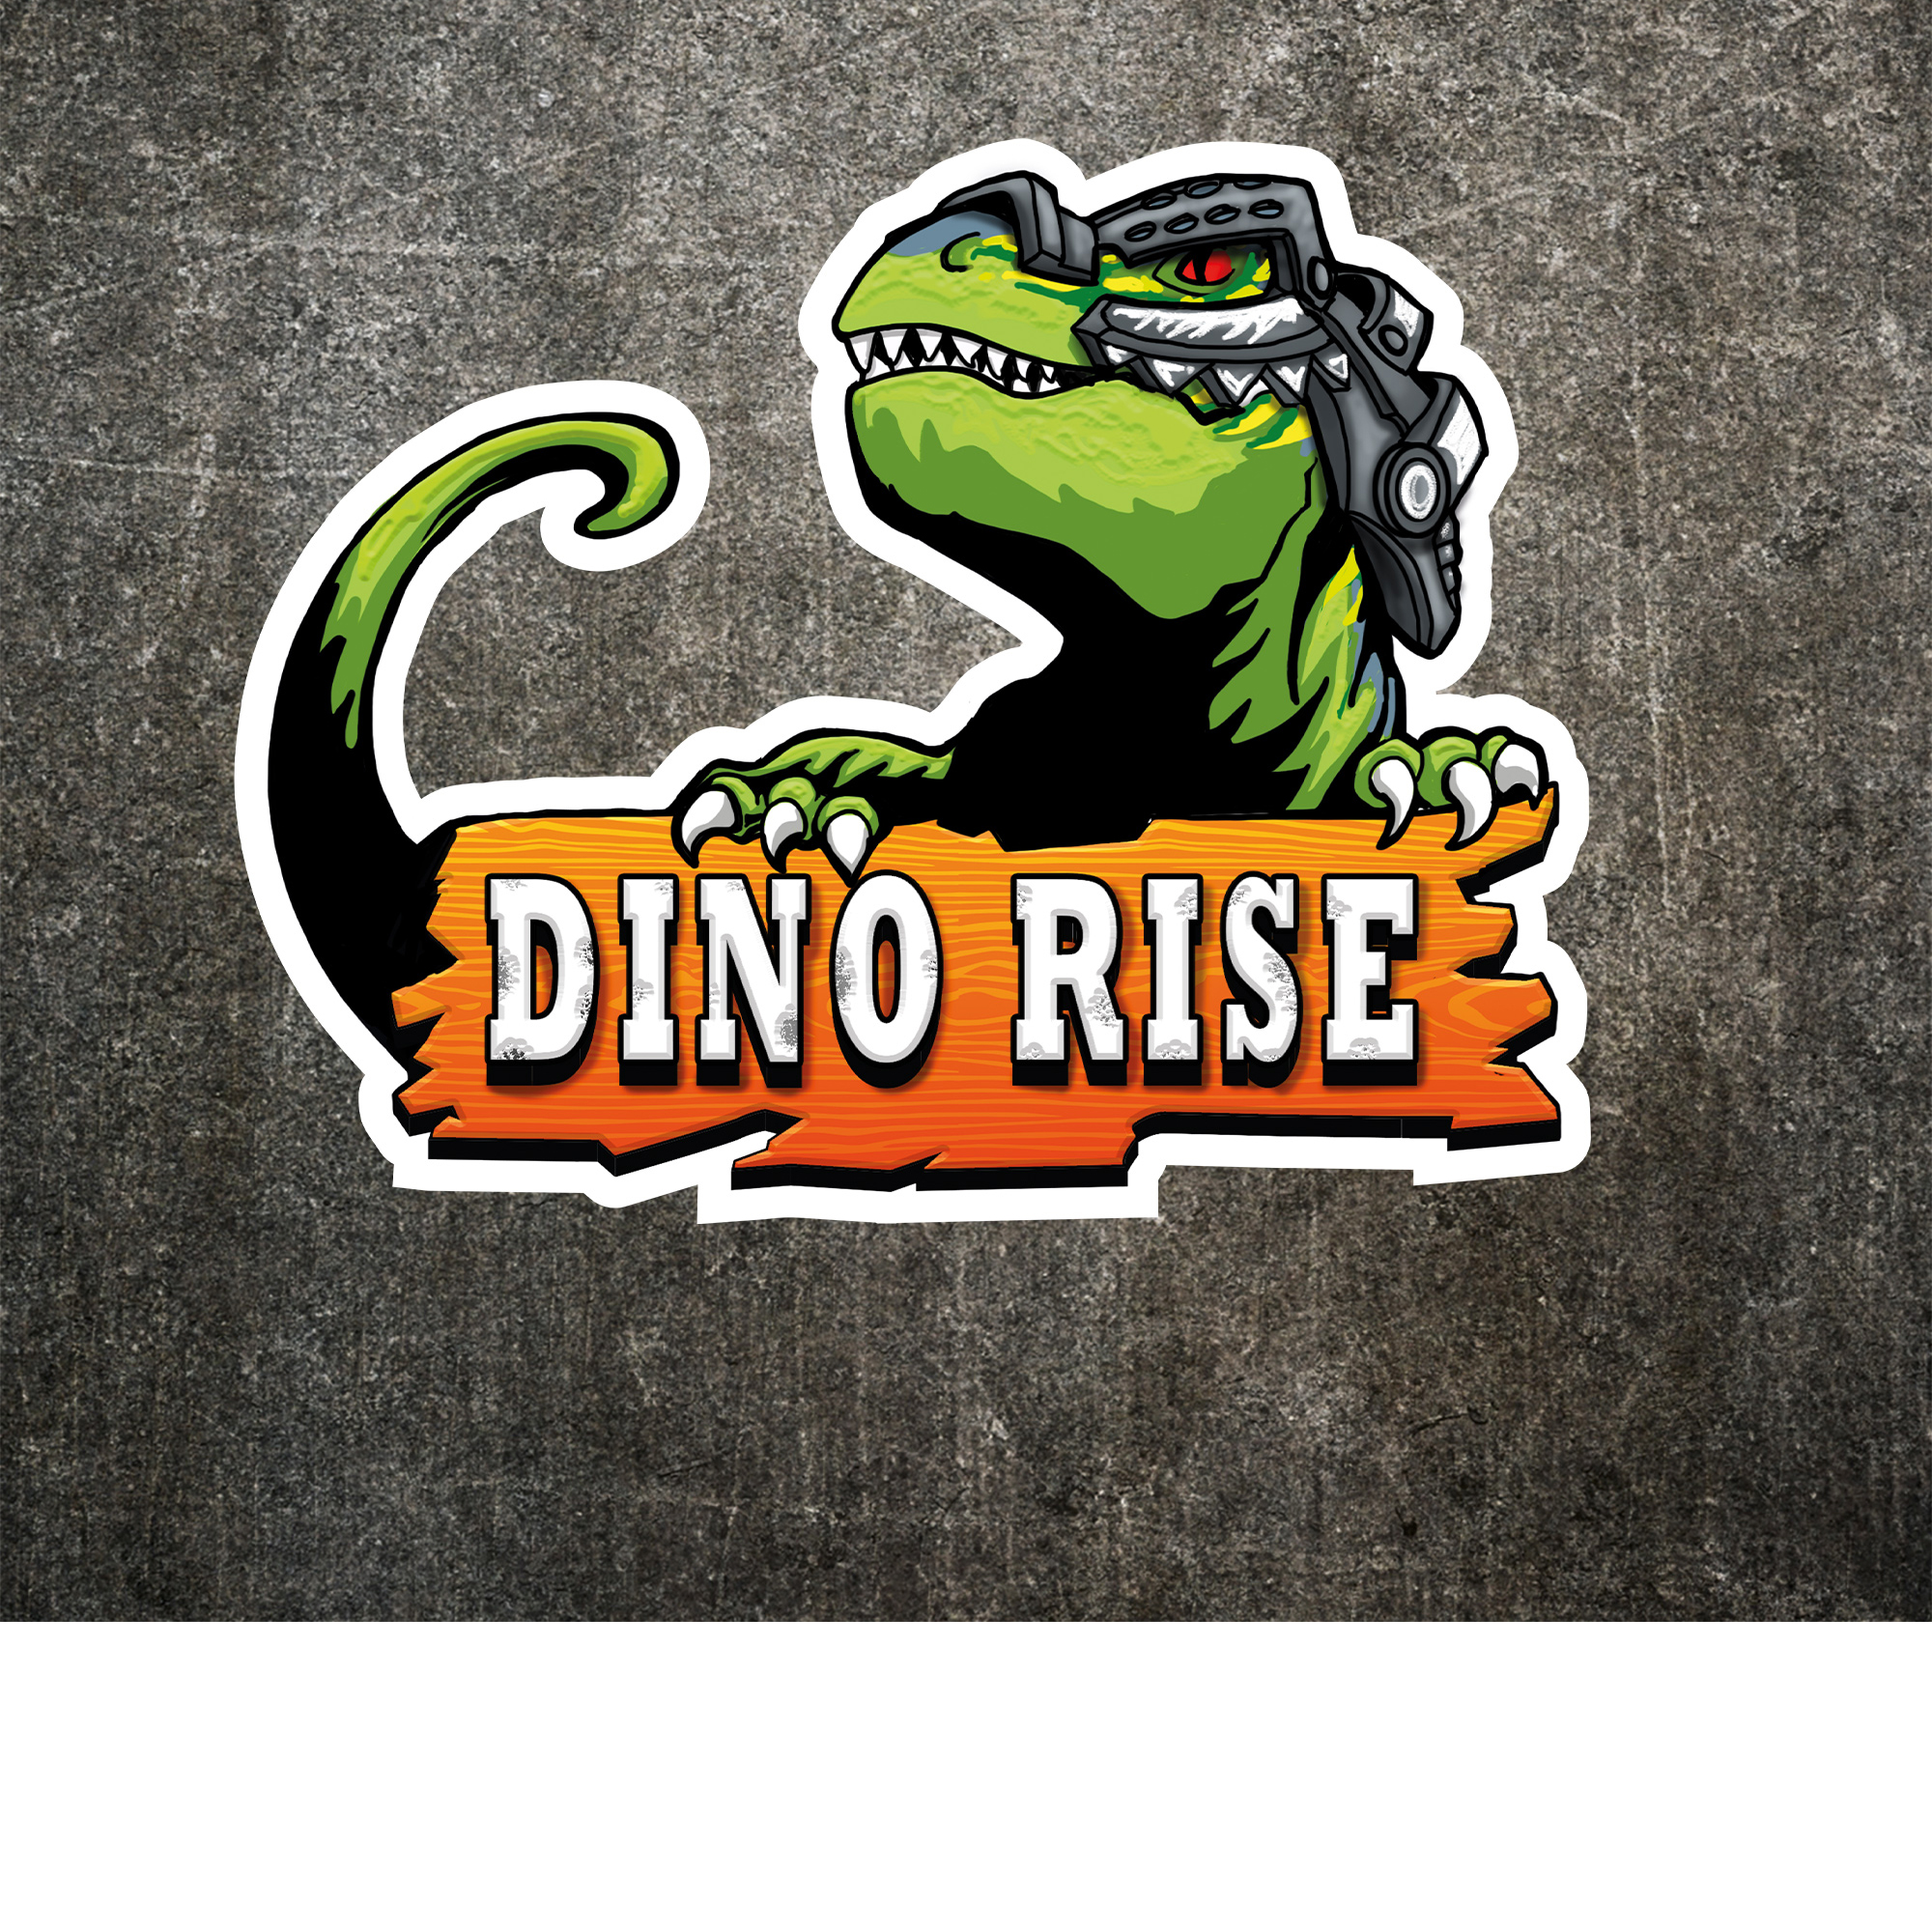 New adventures with Dino Rise